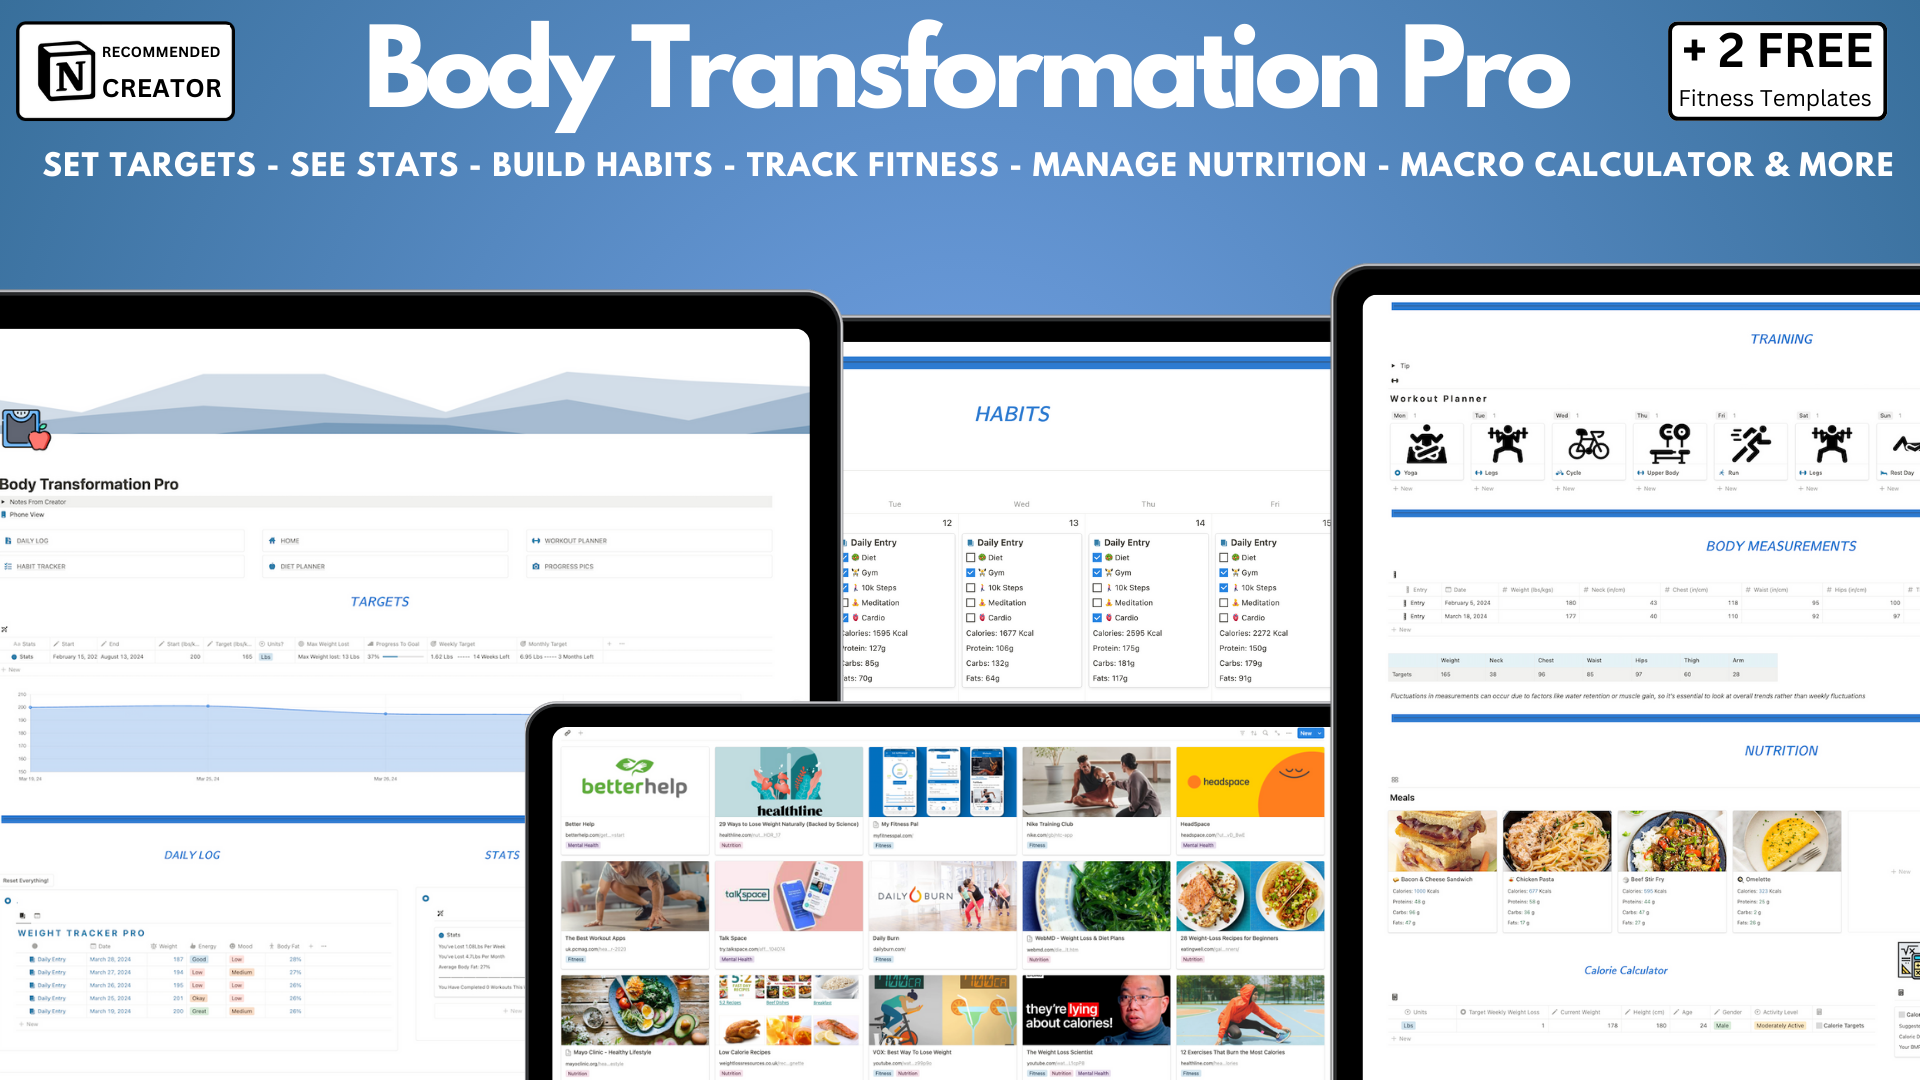 The best tool to achieve transformative weight loss. Set weight targets, track progress, manage nutrition, build habits, meal plan, phone view, fitness, online resources, body measurements, 2 free gifts, a money-back guarantee, lifetime improvements & more!